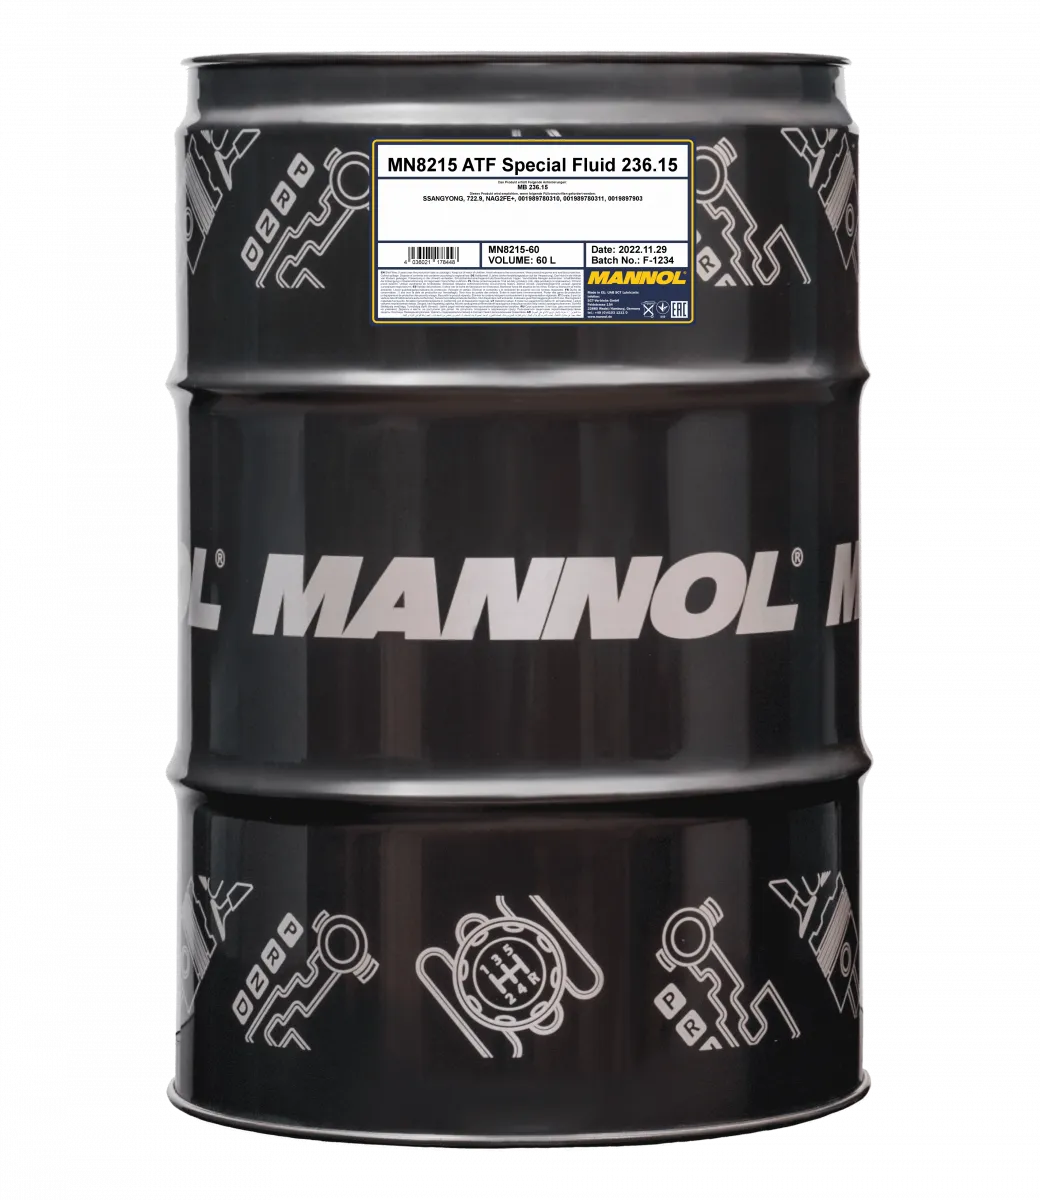 Моторное масло Mannol atf special fluid 236.15#2